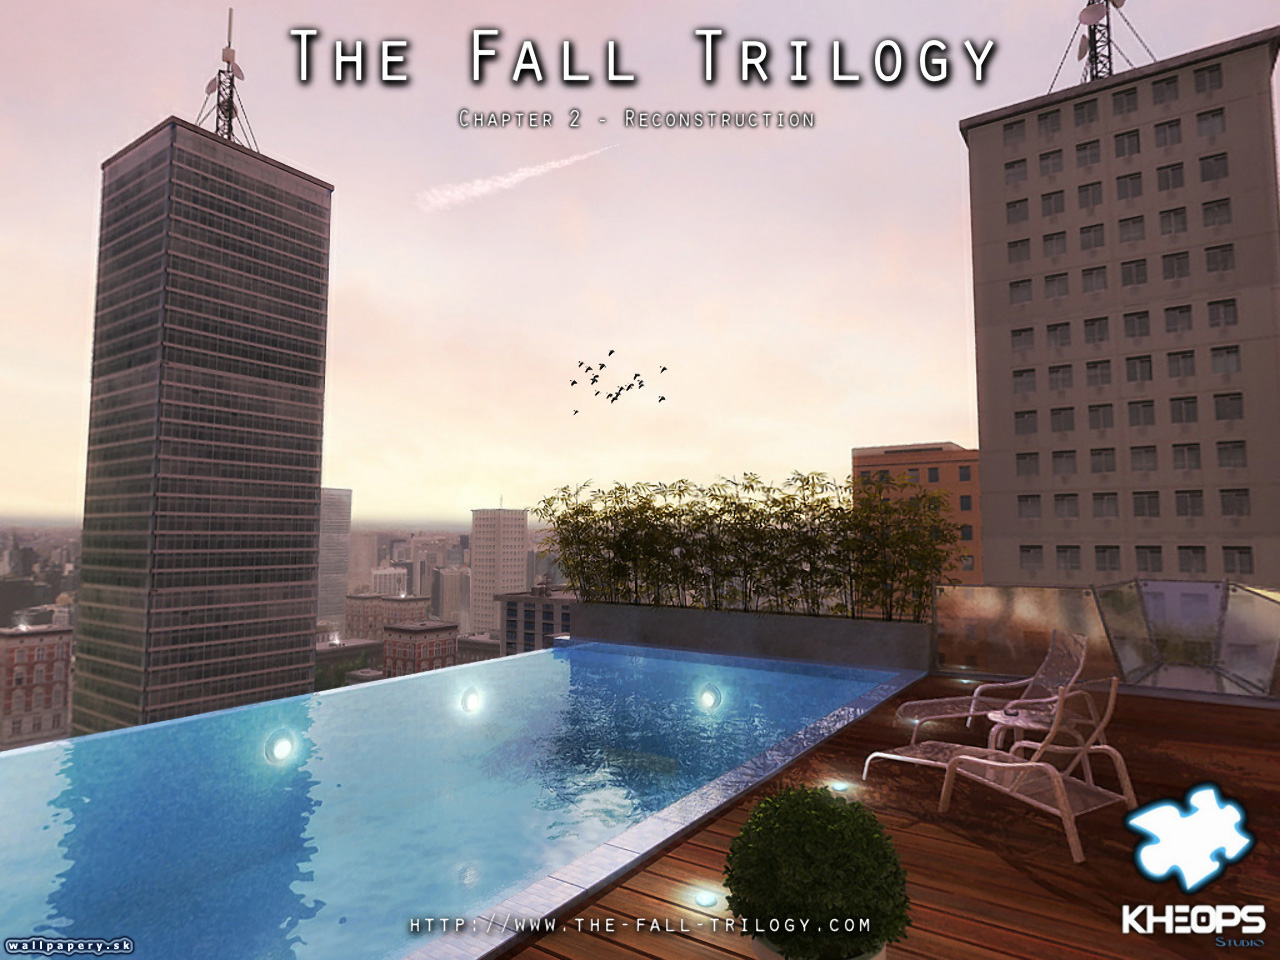 The Fall Trilogy - Chapter 2: Reconstruction - wallpaper 3